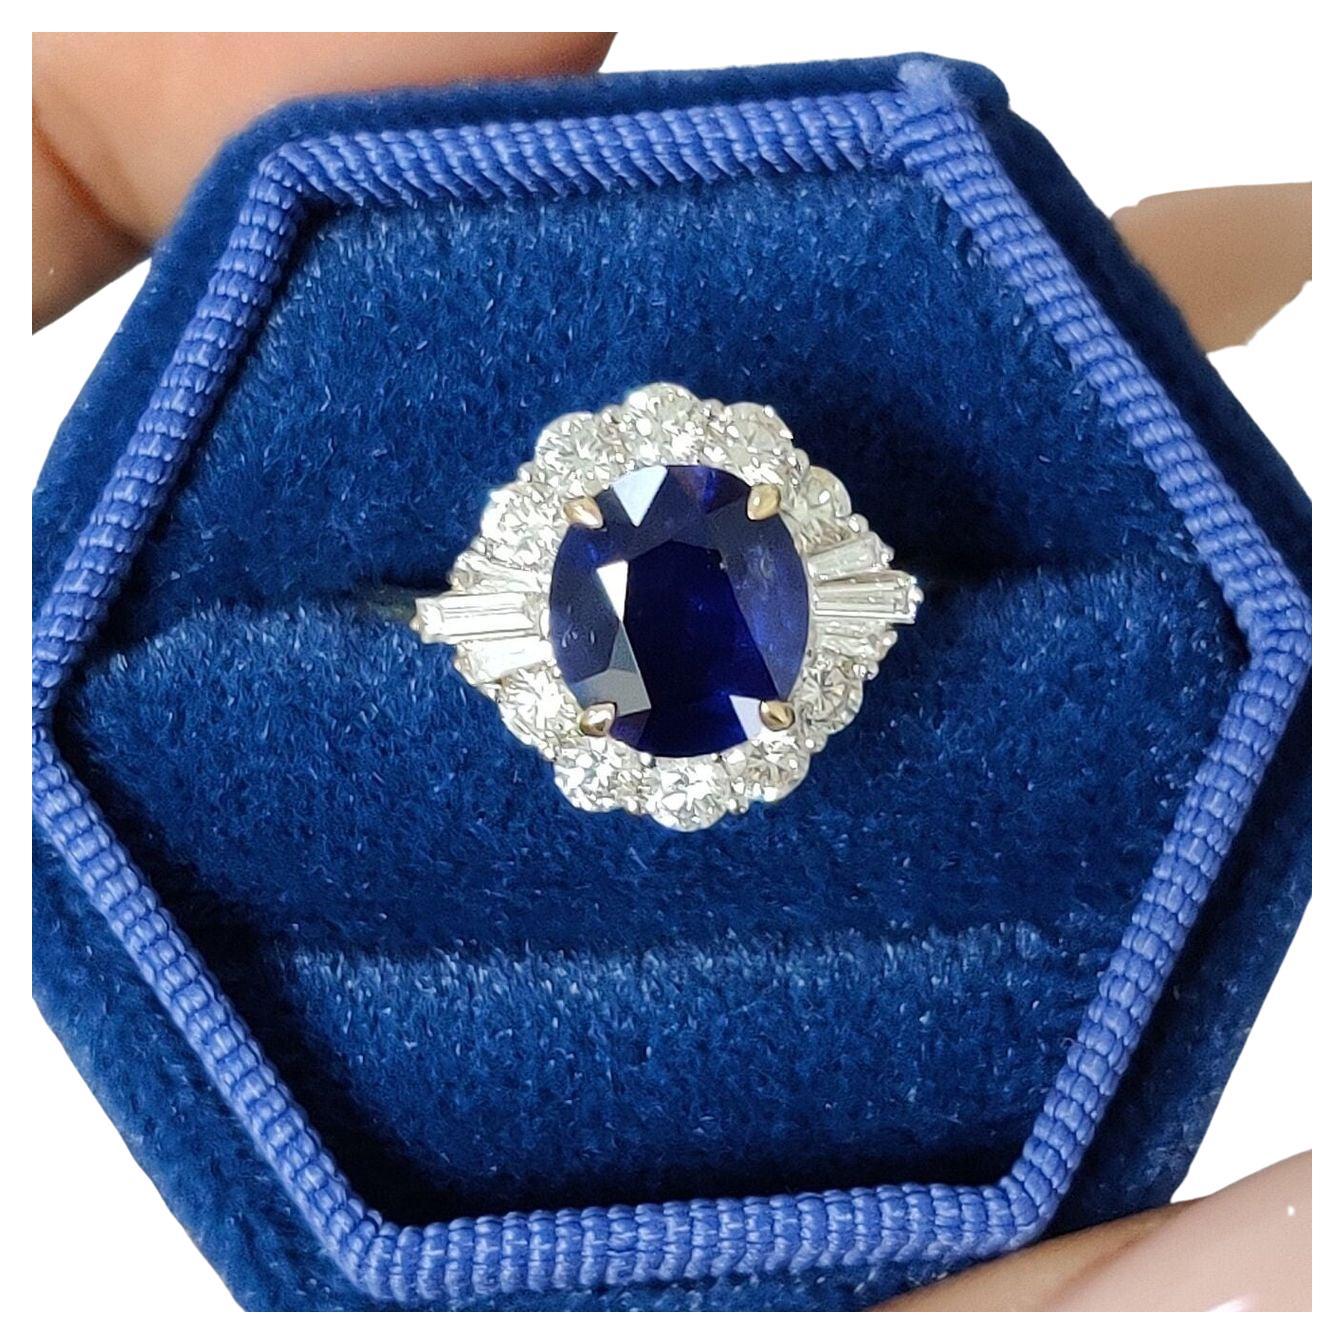 Behold the allure of the 2.37 Carat Ceylon Blue Sapphire & Diamond Ring, a captivating testament to exquisite craftsmanship and natural beauty. The centerpiece of this ring is a resplendent 2.37-carat oval-shaped Ceylon Blue Sapphire. Originating